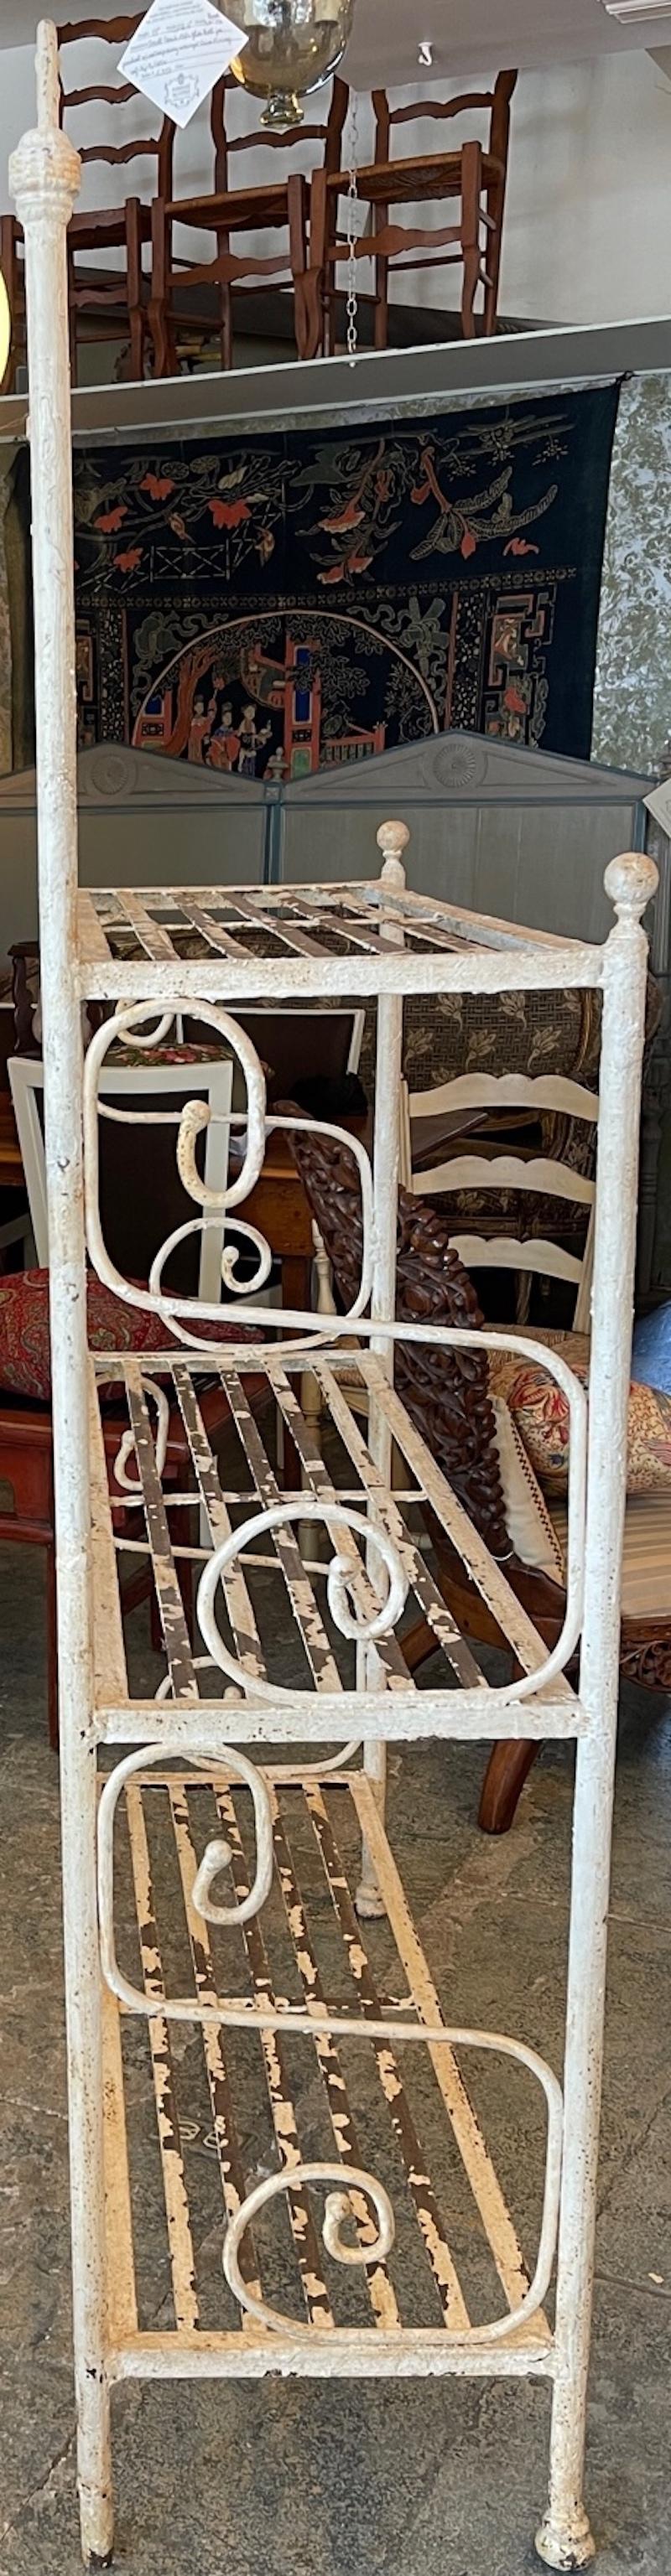 French 19th Century Painted Wrought Iron 3 Shelf Bakers Rack In Distressed Condition For Sale In Santa Monica, CA